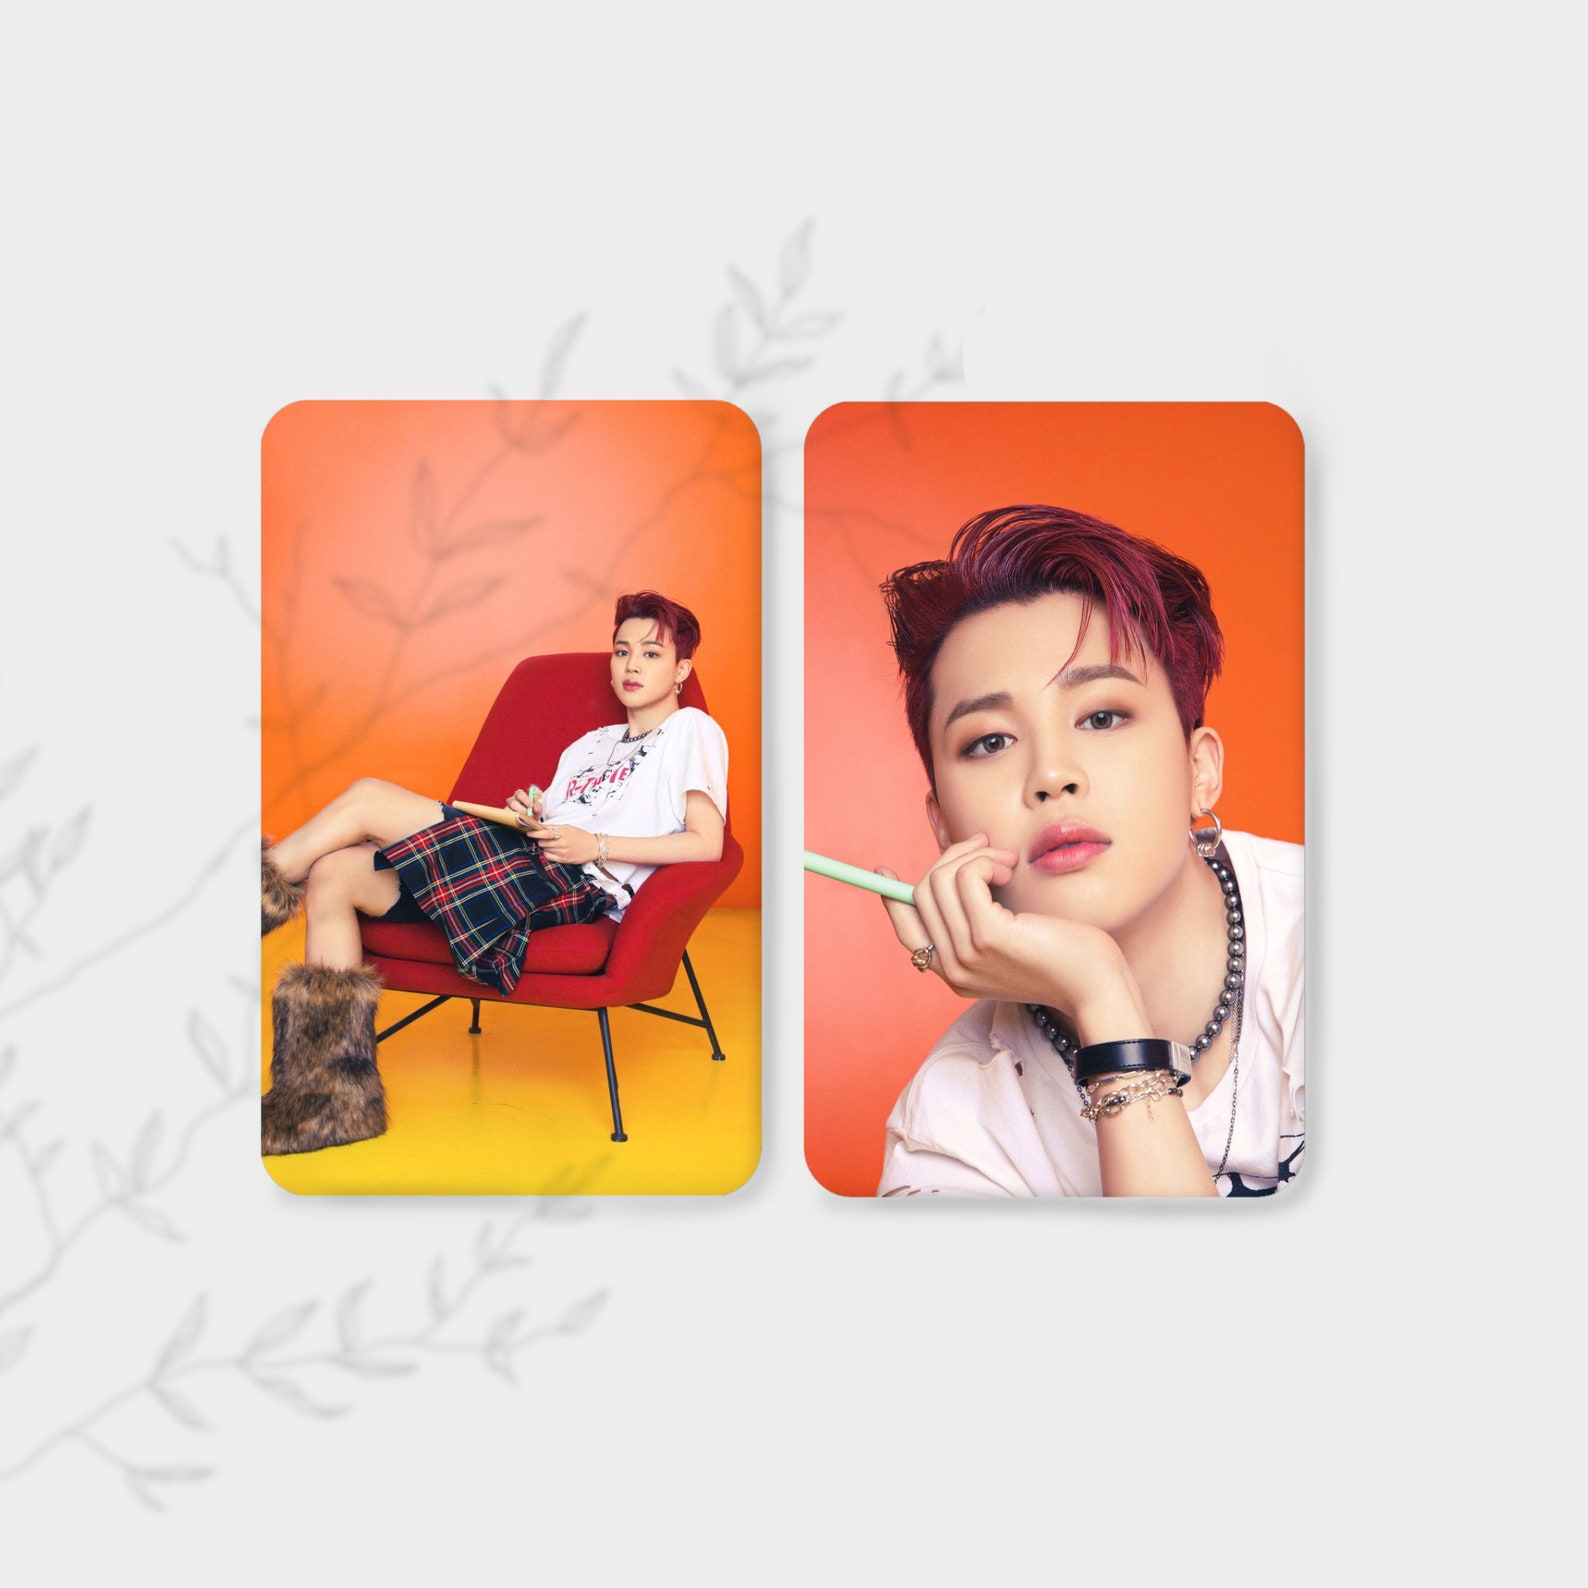 BTS Butter Concept Set 2 Members Set of Two Photocards | Etsy